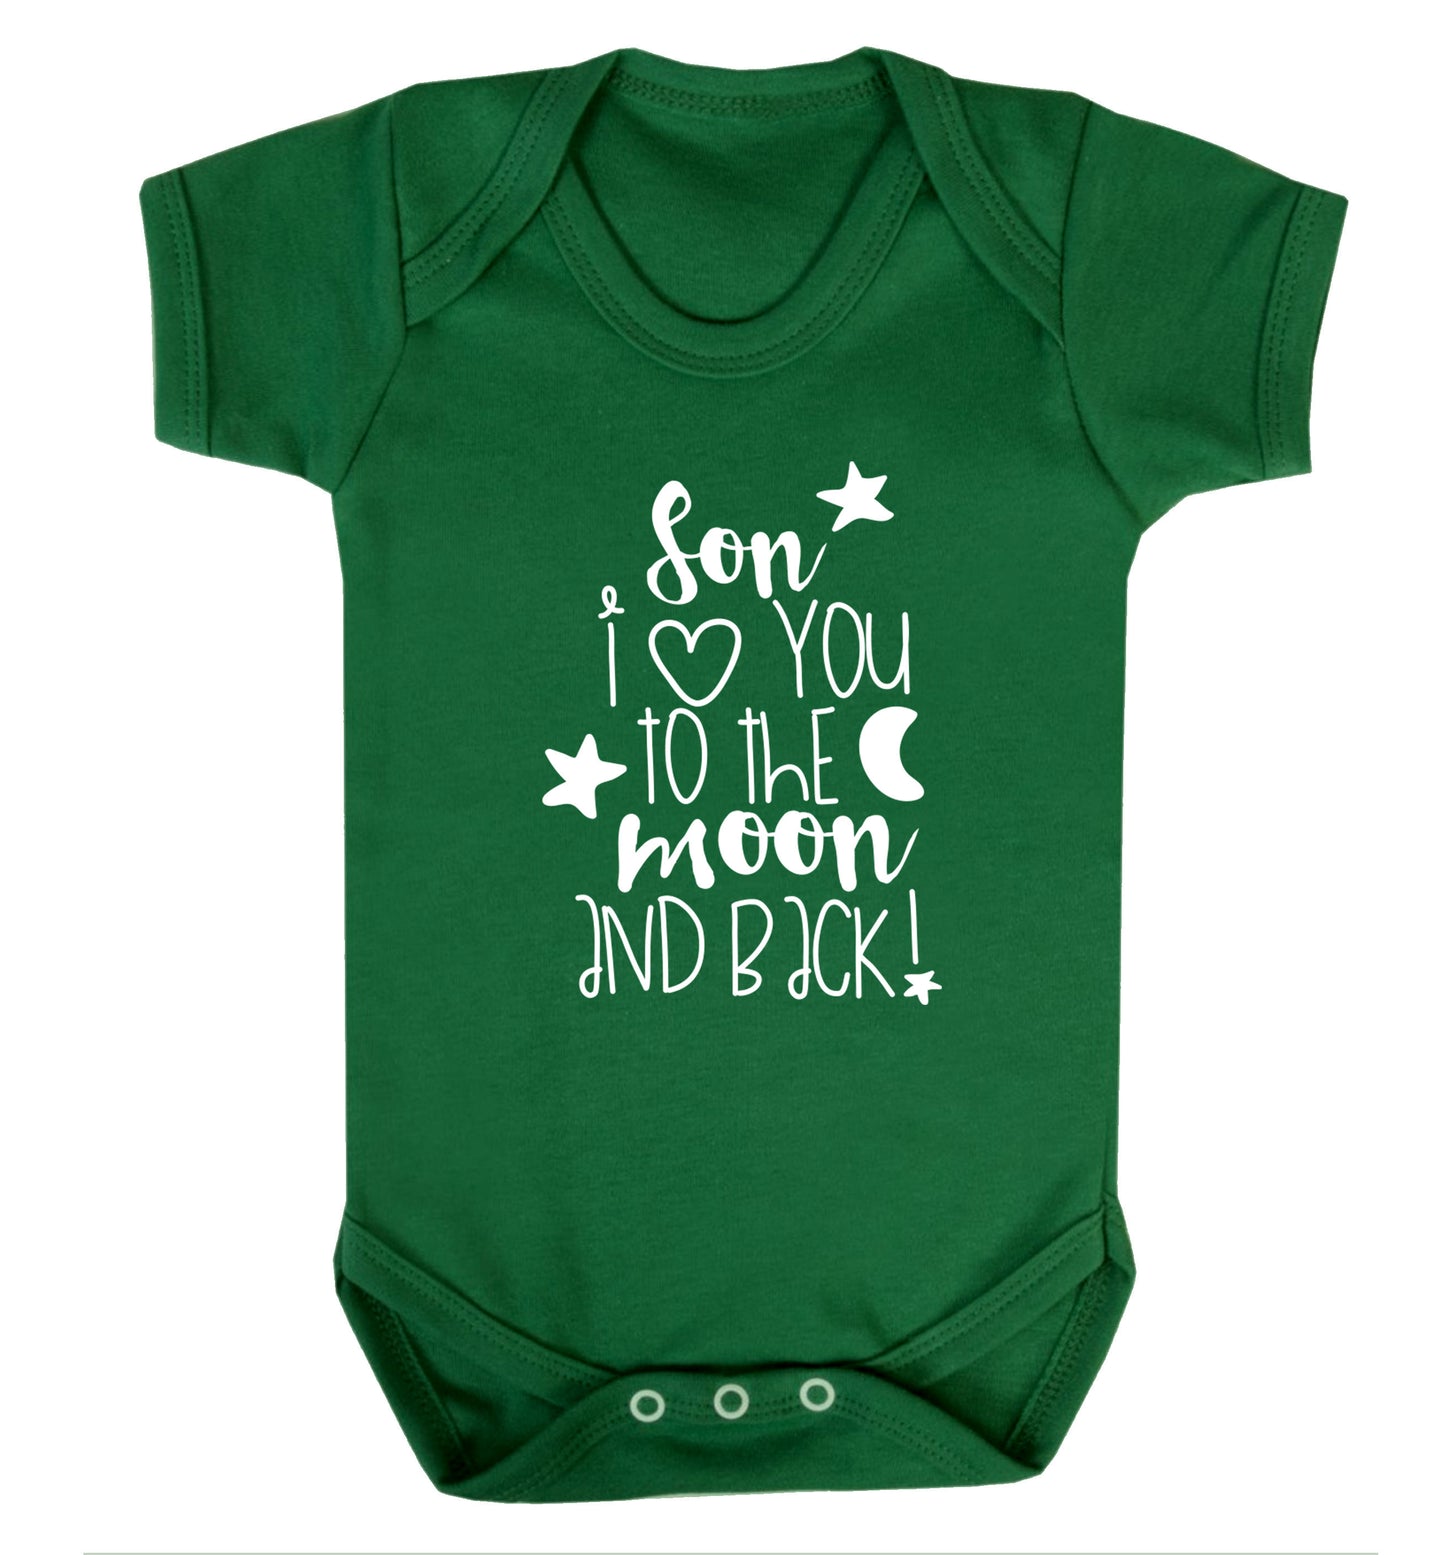 Son I love you to the moon and back Baby Vest green 18-24 months